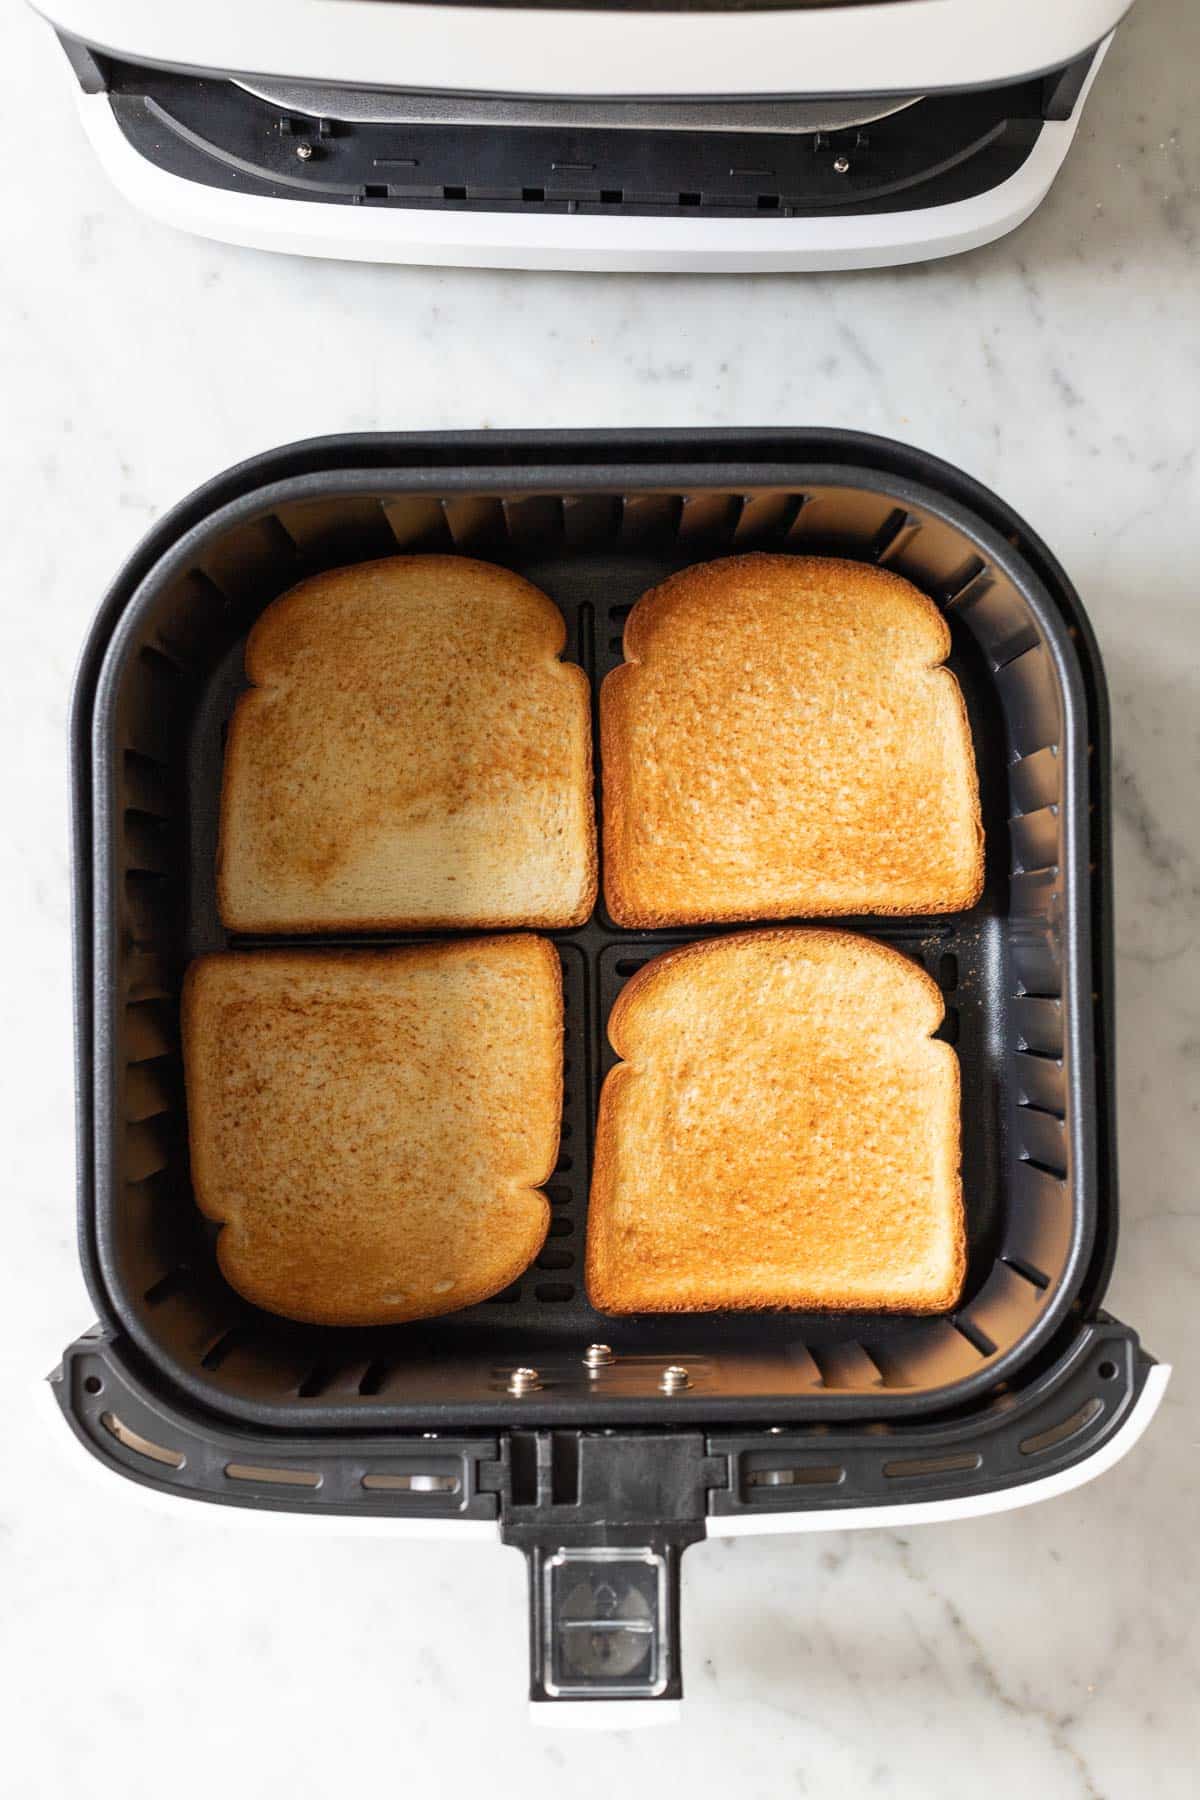 Toasted bread in an Air Fryer basket.